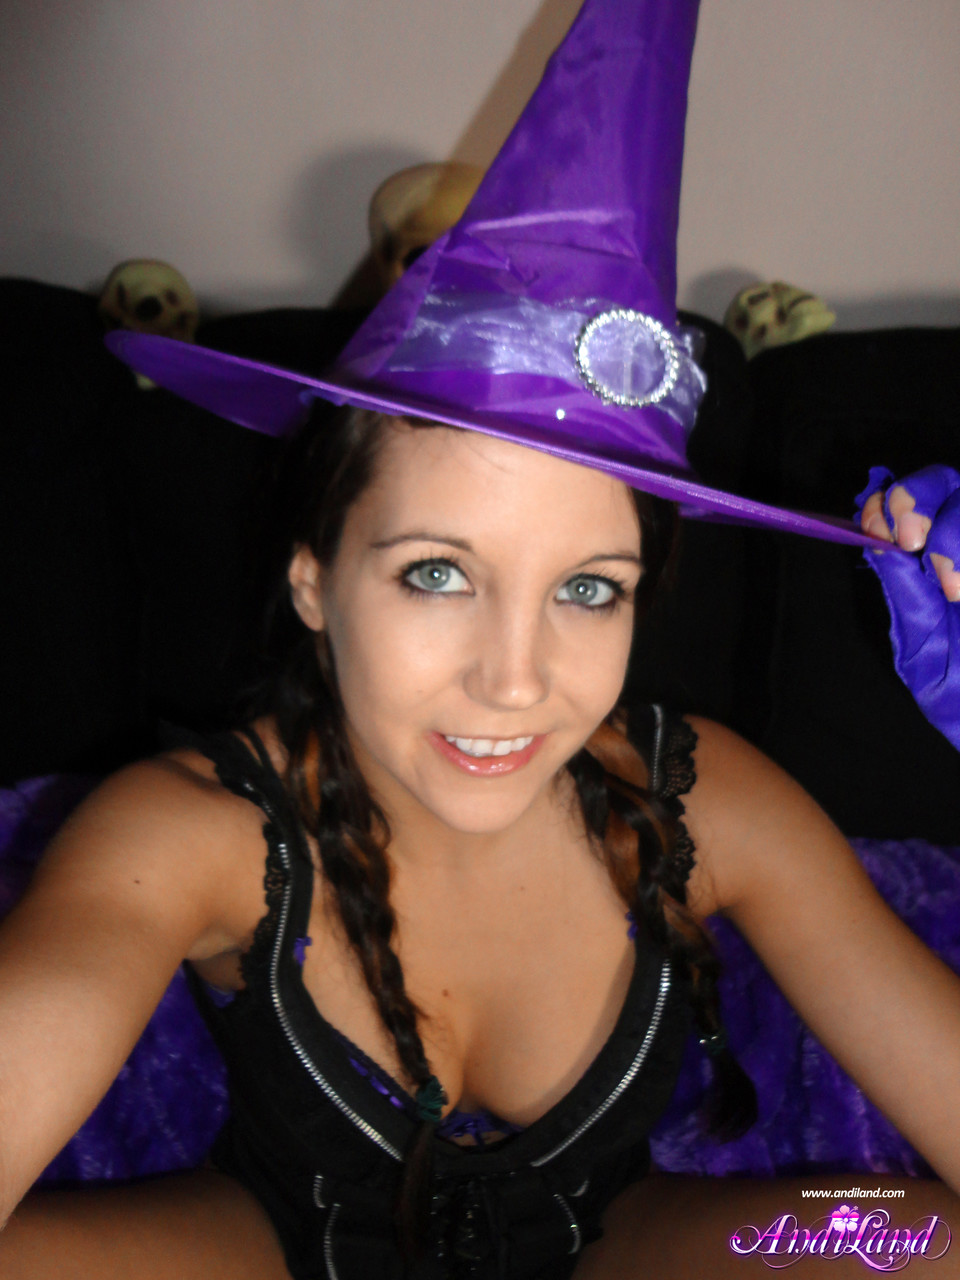 Teen amateur Andi Land teases during upskirt action in a Halloween outfit zdjęcie porno #428432666 | Andi Land Pics, Andi Land, Cosplay, mobilne porno